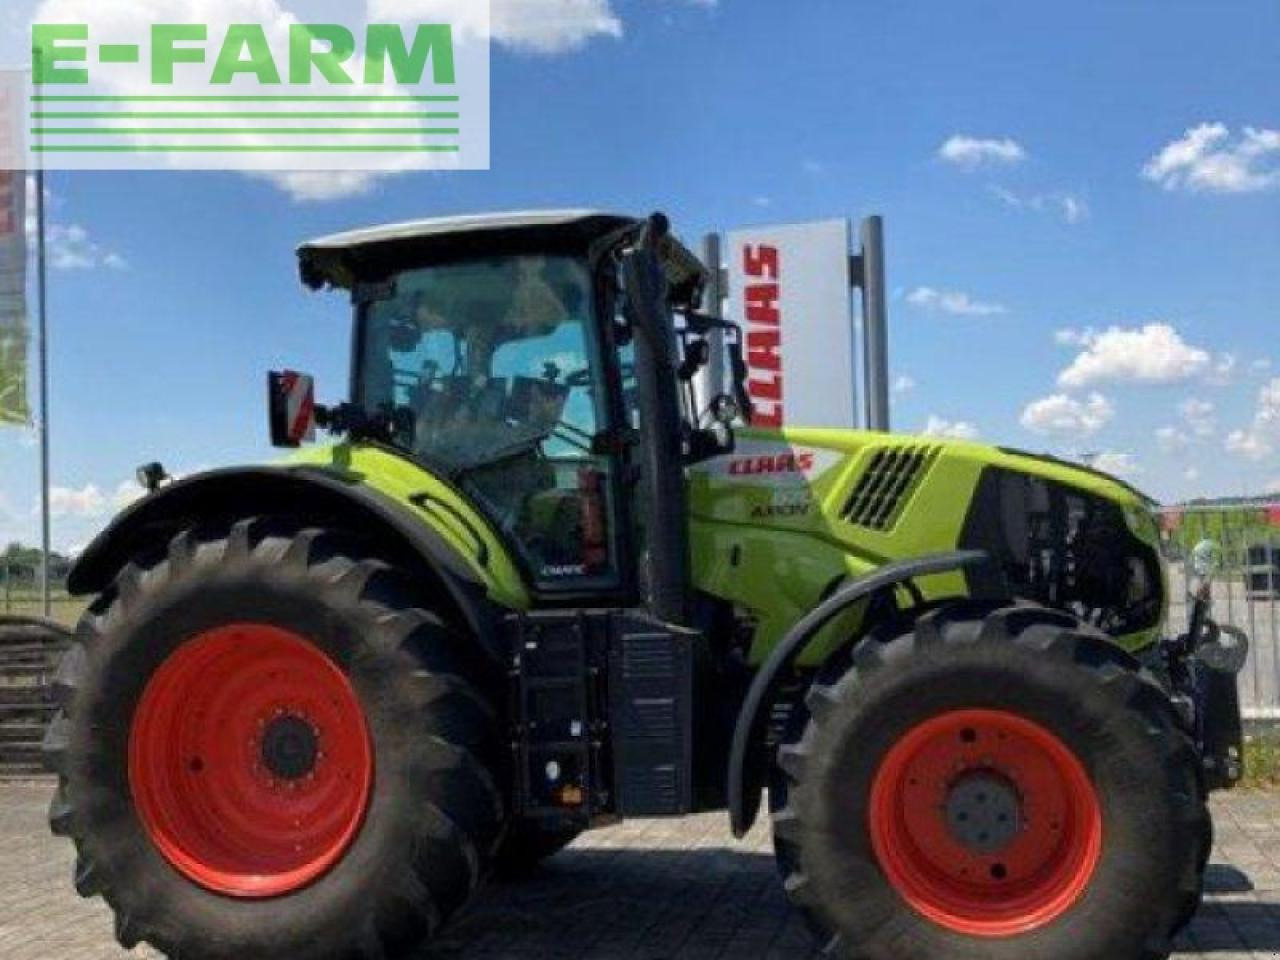 Tractor CLAAS axion 870 cmatic - stage v ce